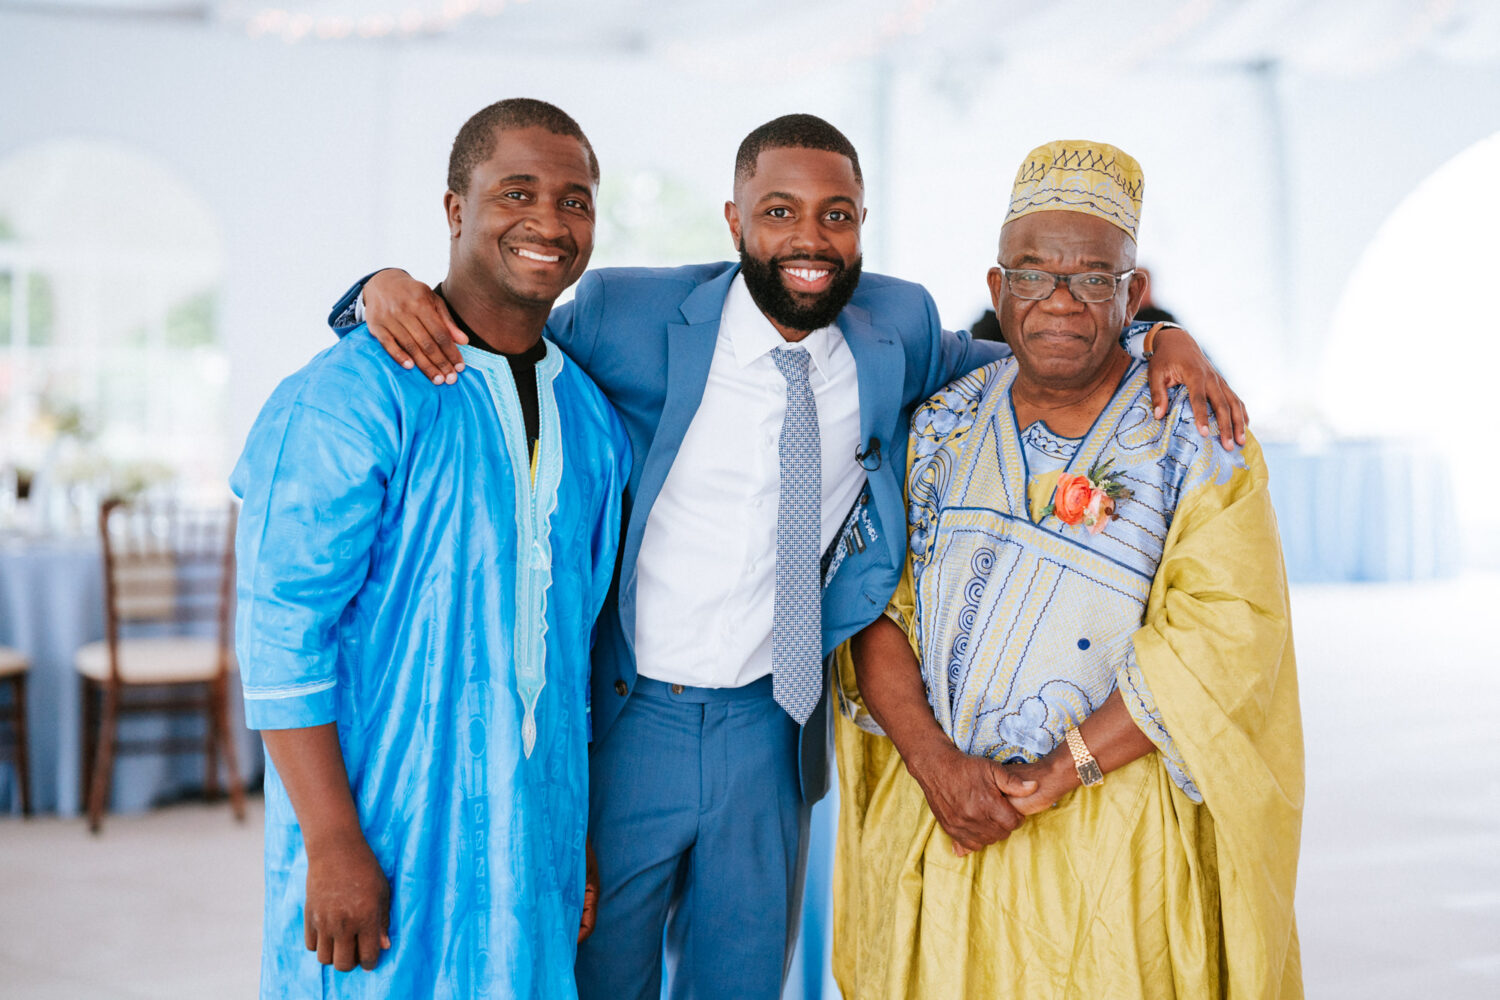 groom group picture with his father and brother